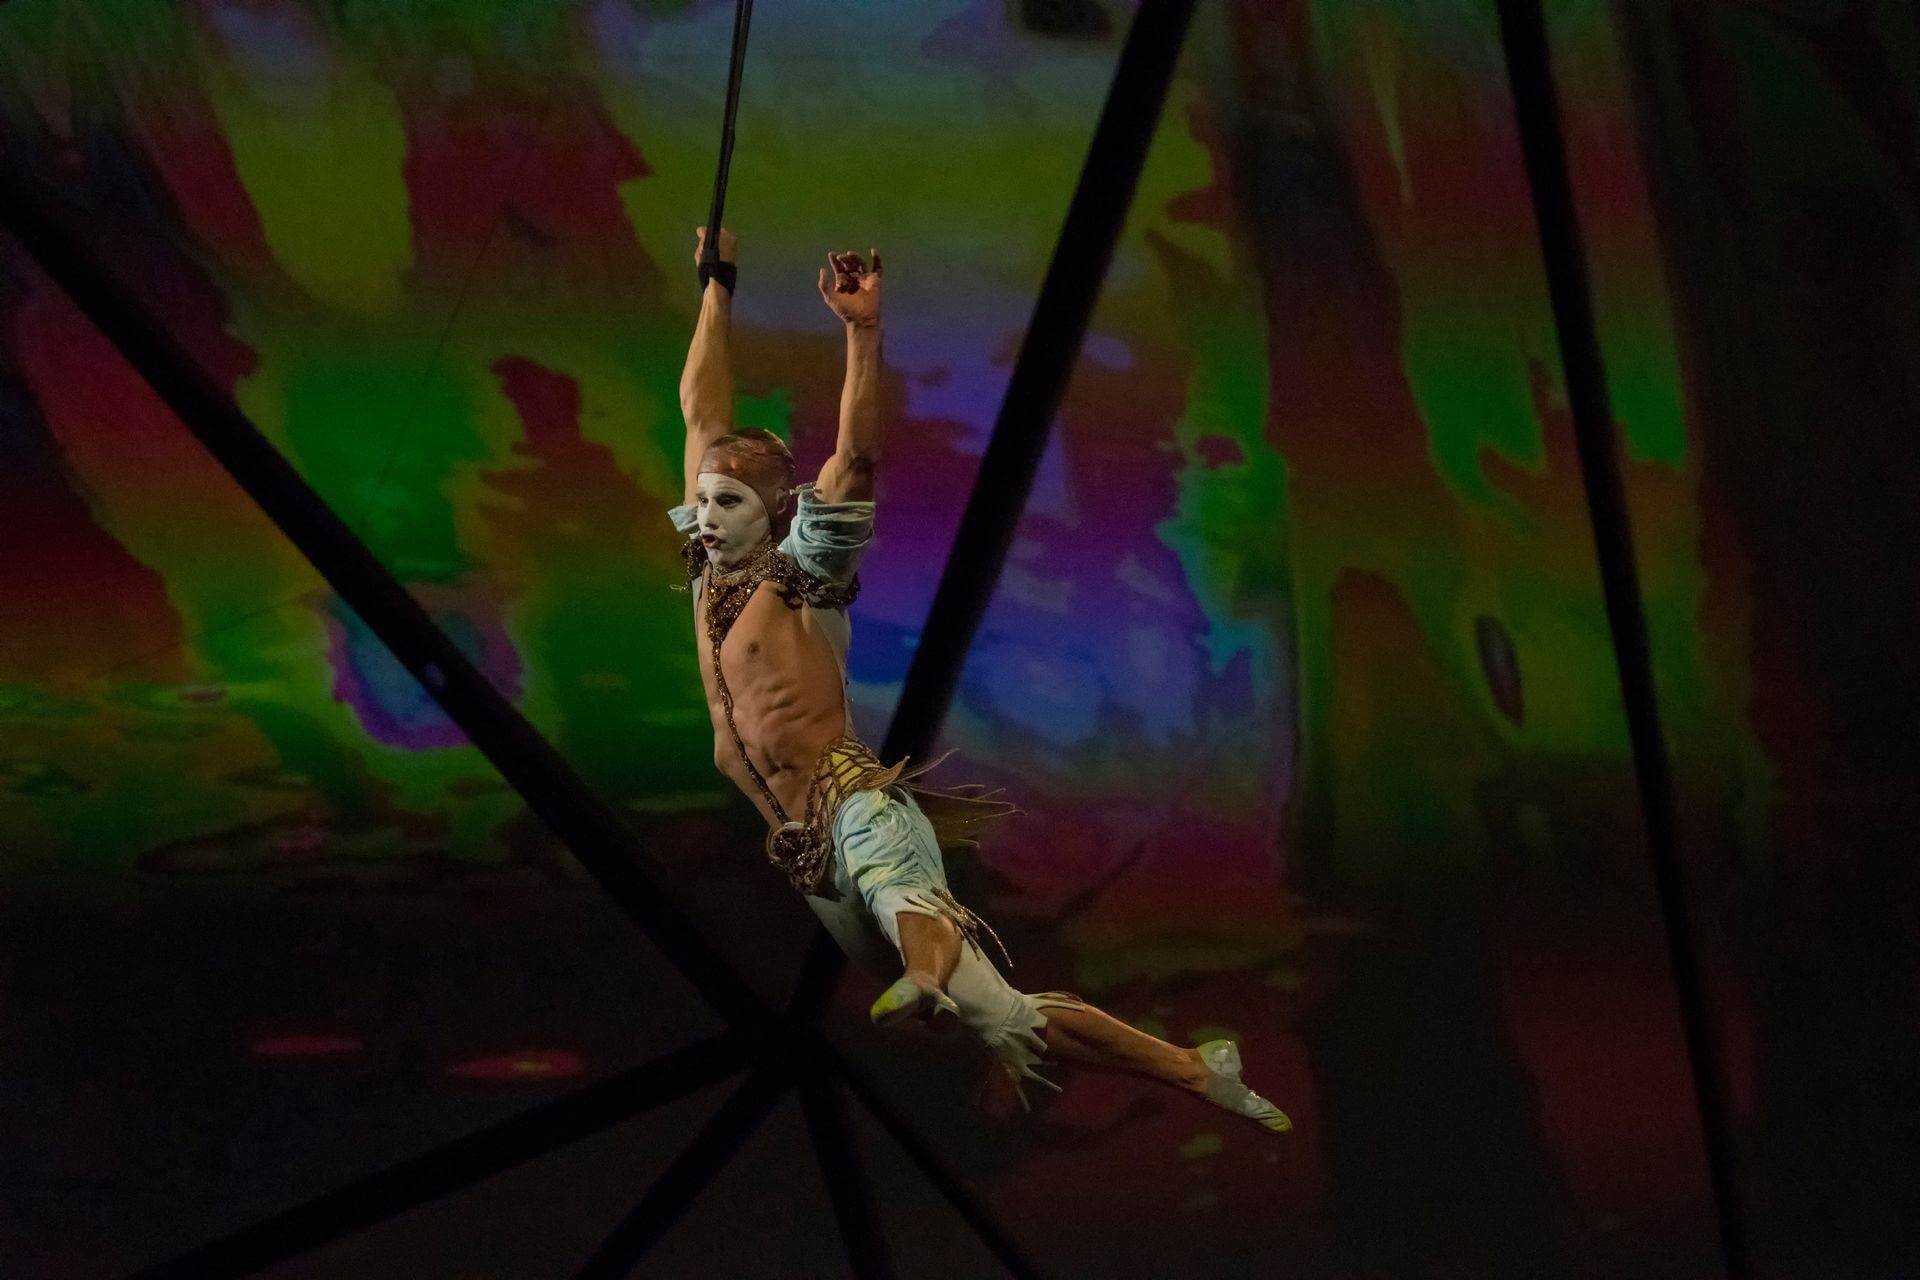 Scalada - Vision by Cirque du Soleil 2016: Acrobatics with background projection mapping